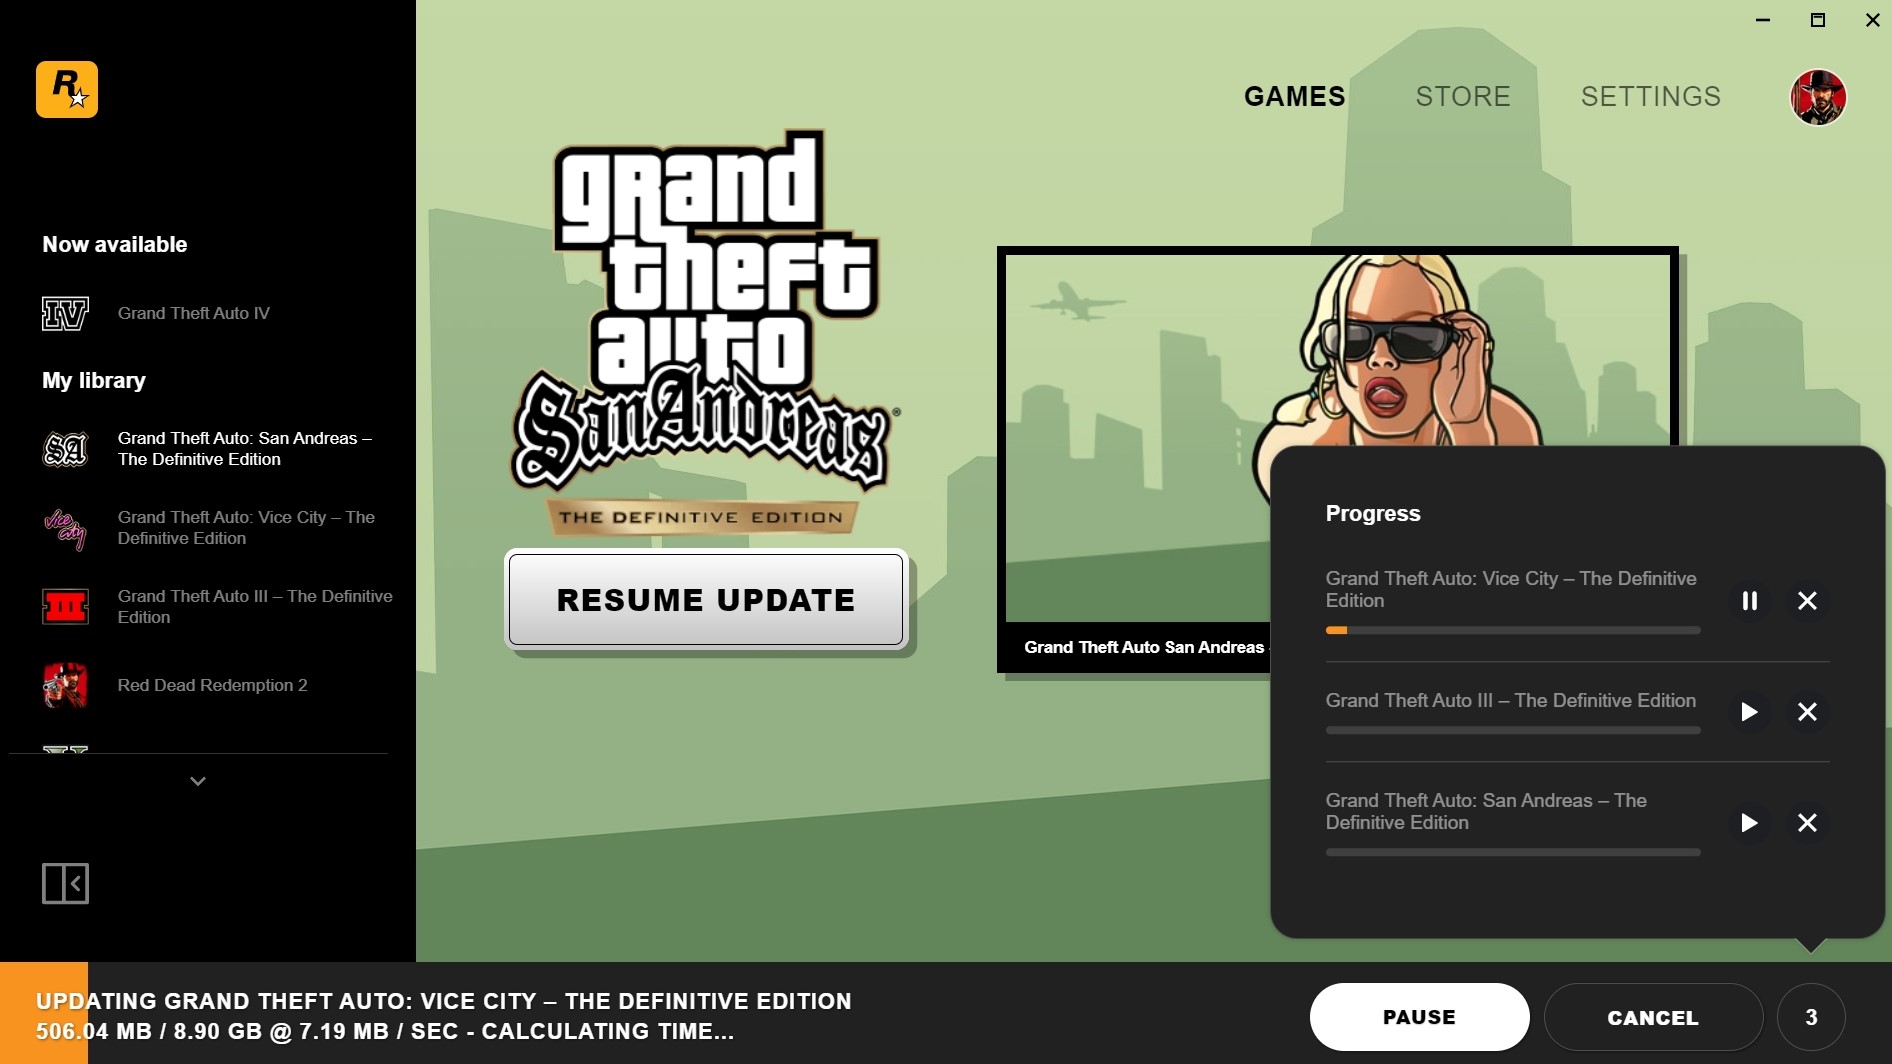 Download Rockstar Game Launcher and Get Grand Theft Auto San